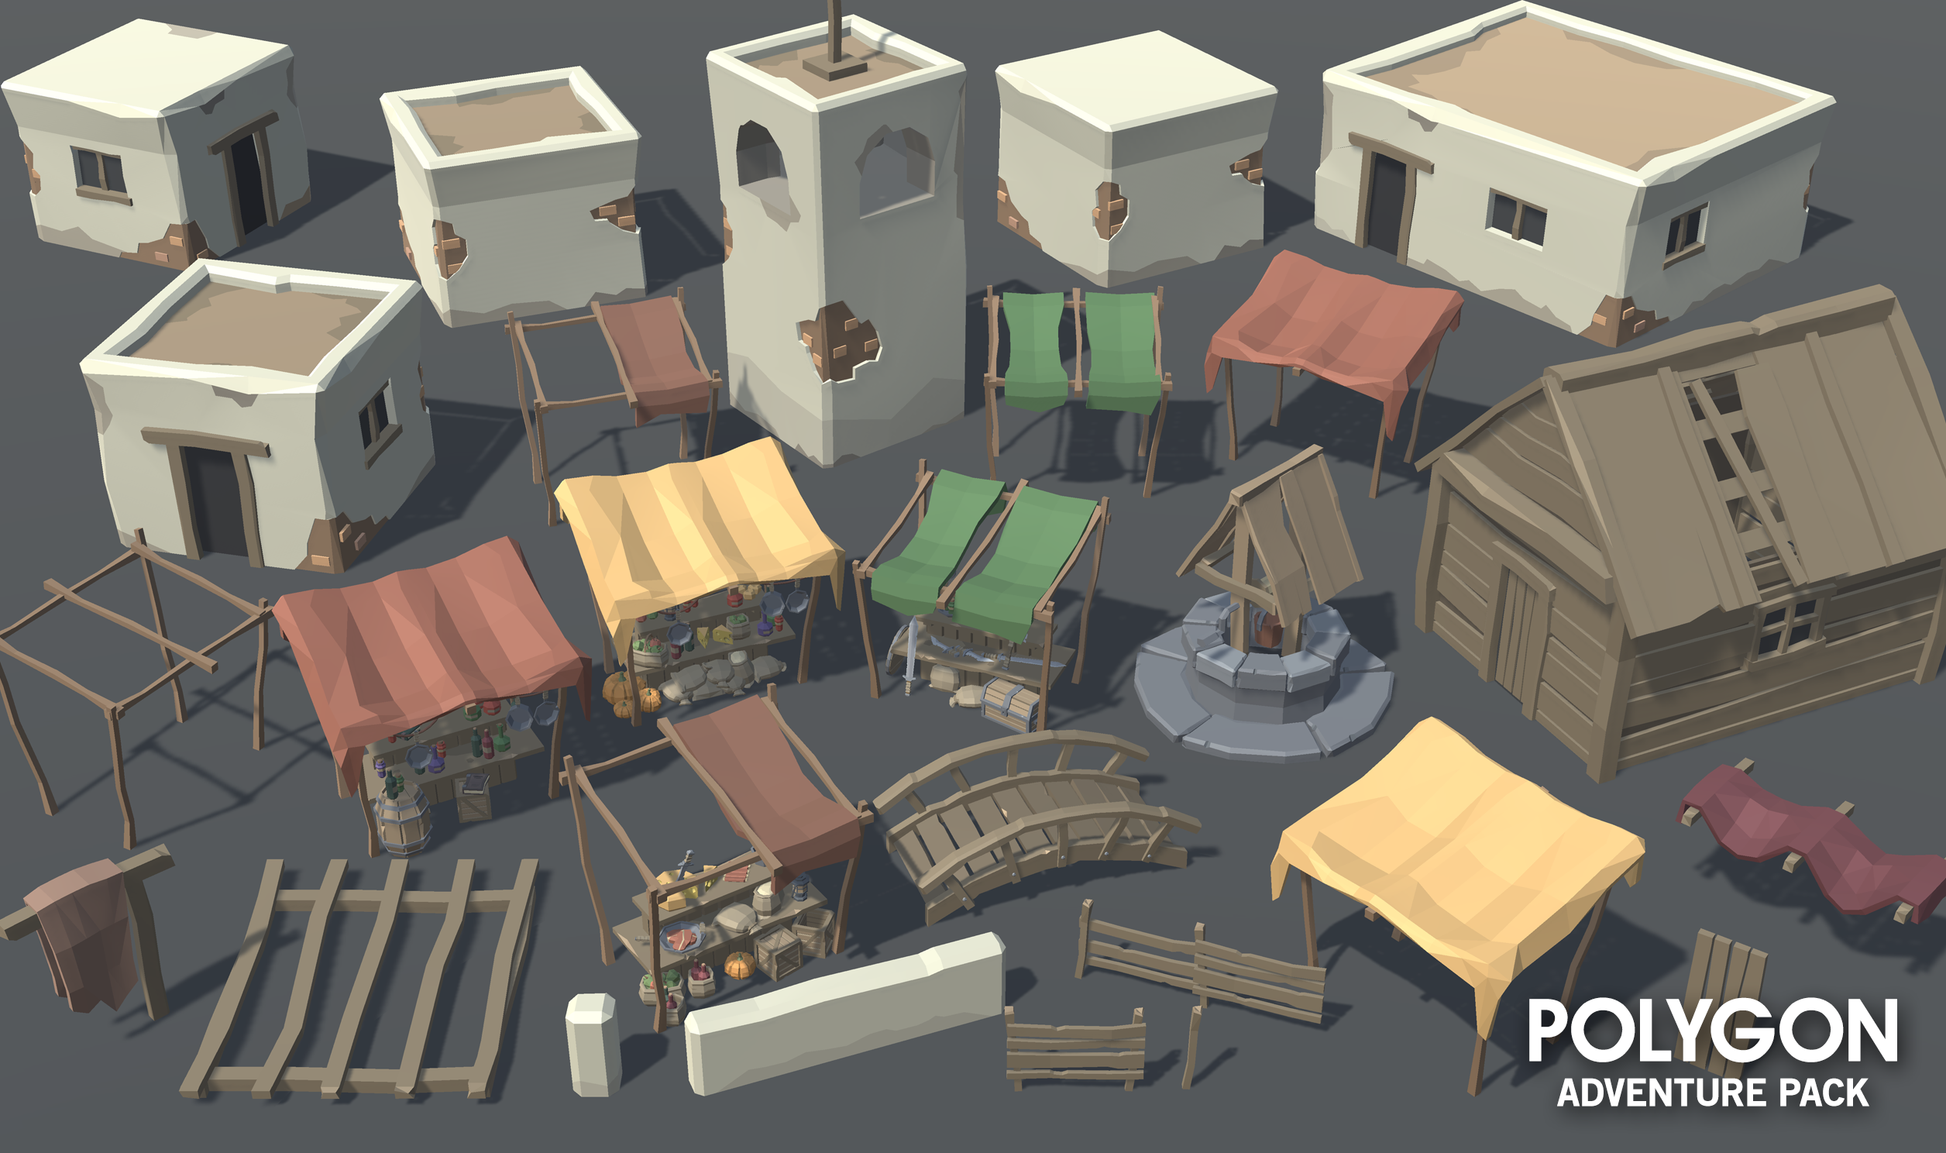 Low poly 3d game asset of modular village buildings, wells, farm stalls, tarps, sheds and homesteads